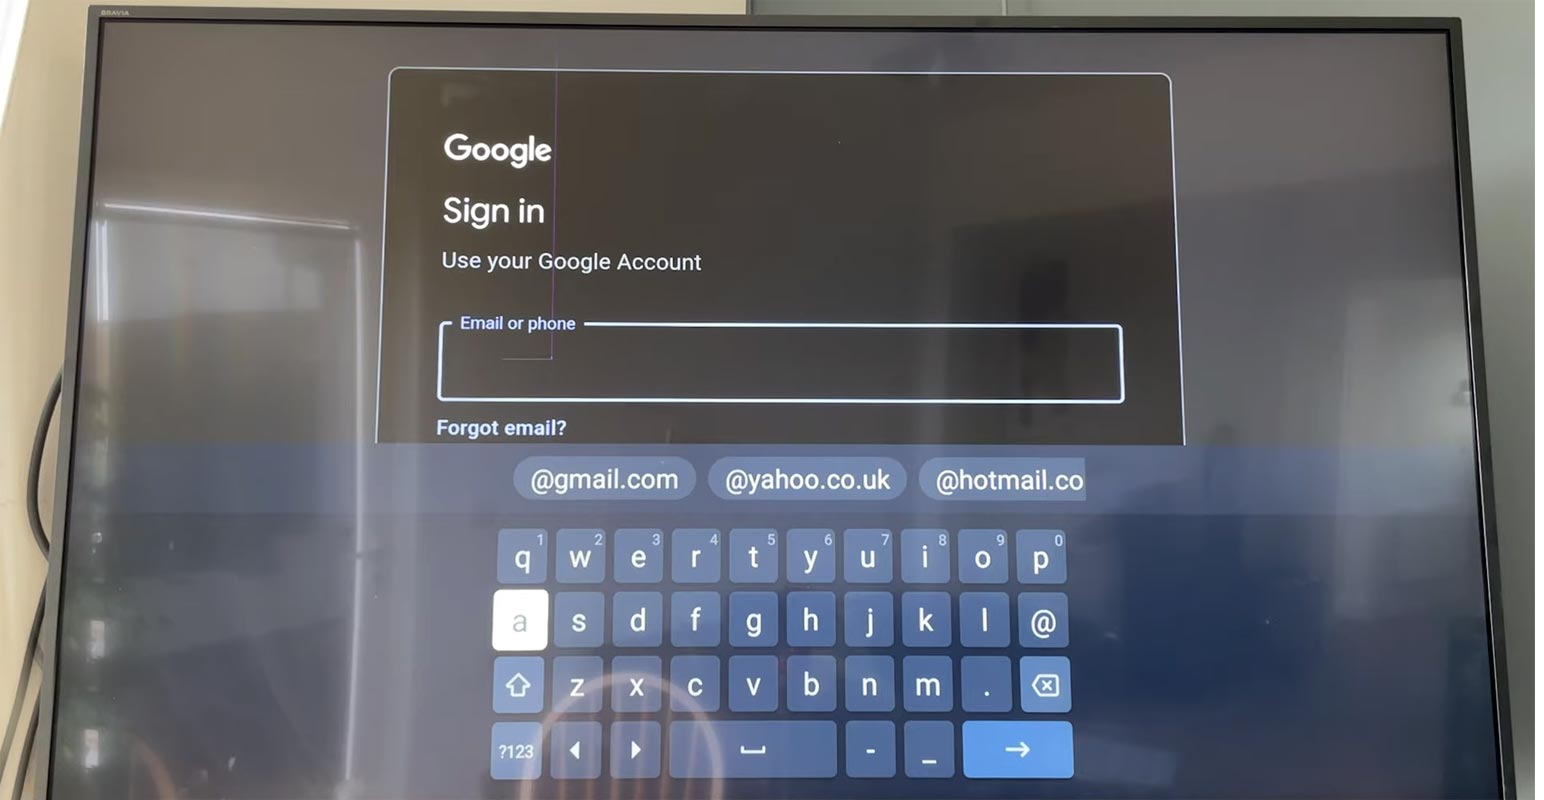 Login to Google Account in Android TV